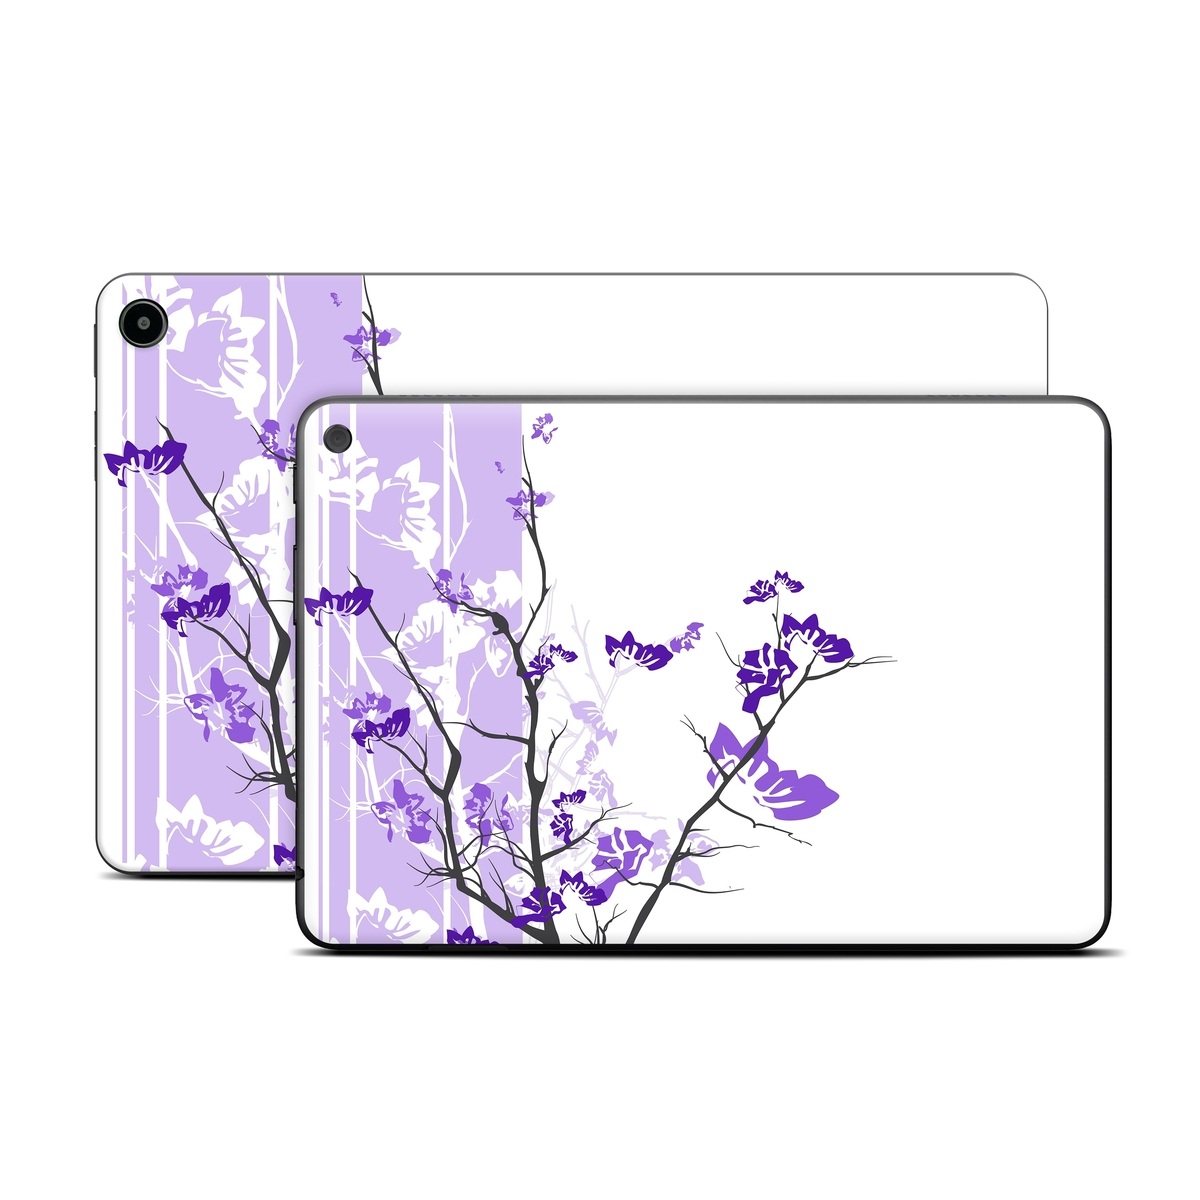 Amazon Fire Tablet Series Skin Skin design of Branch, Purple, Violet, Lilac, Lavender, Plant, Twig, Flower, Tree, Wildflower, with white, purple, gray, pink, black colors